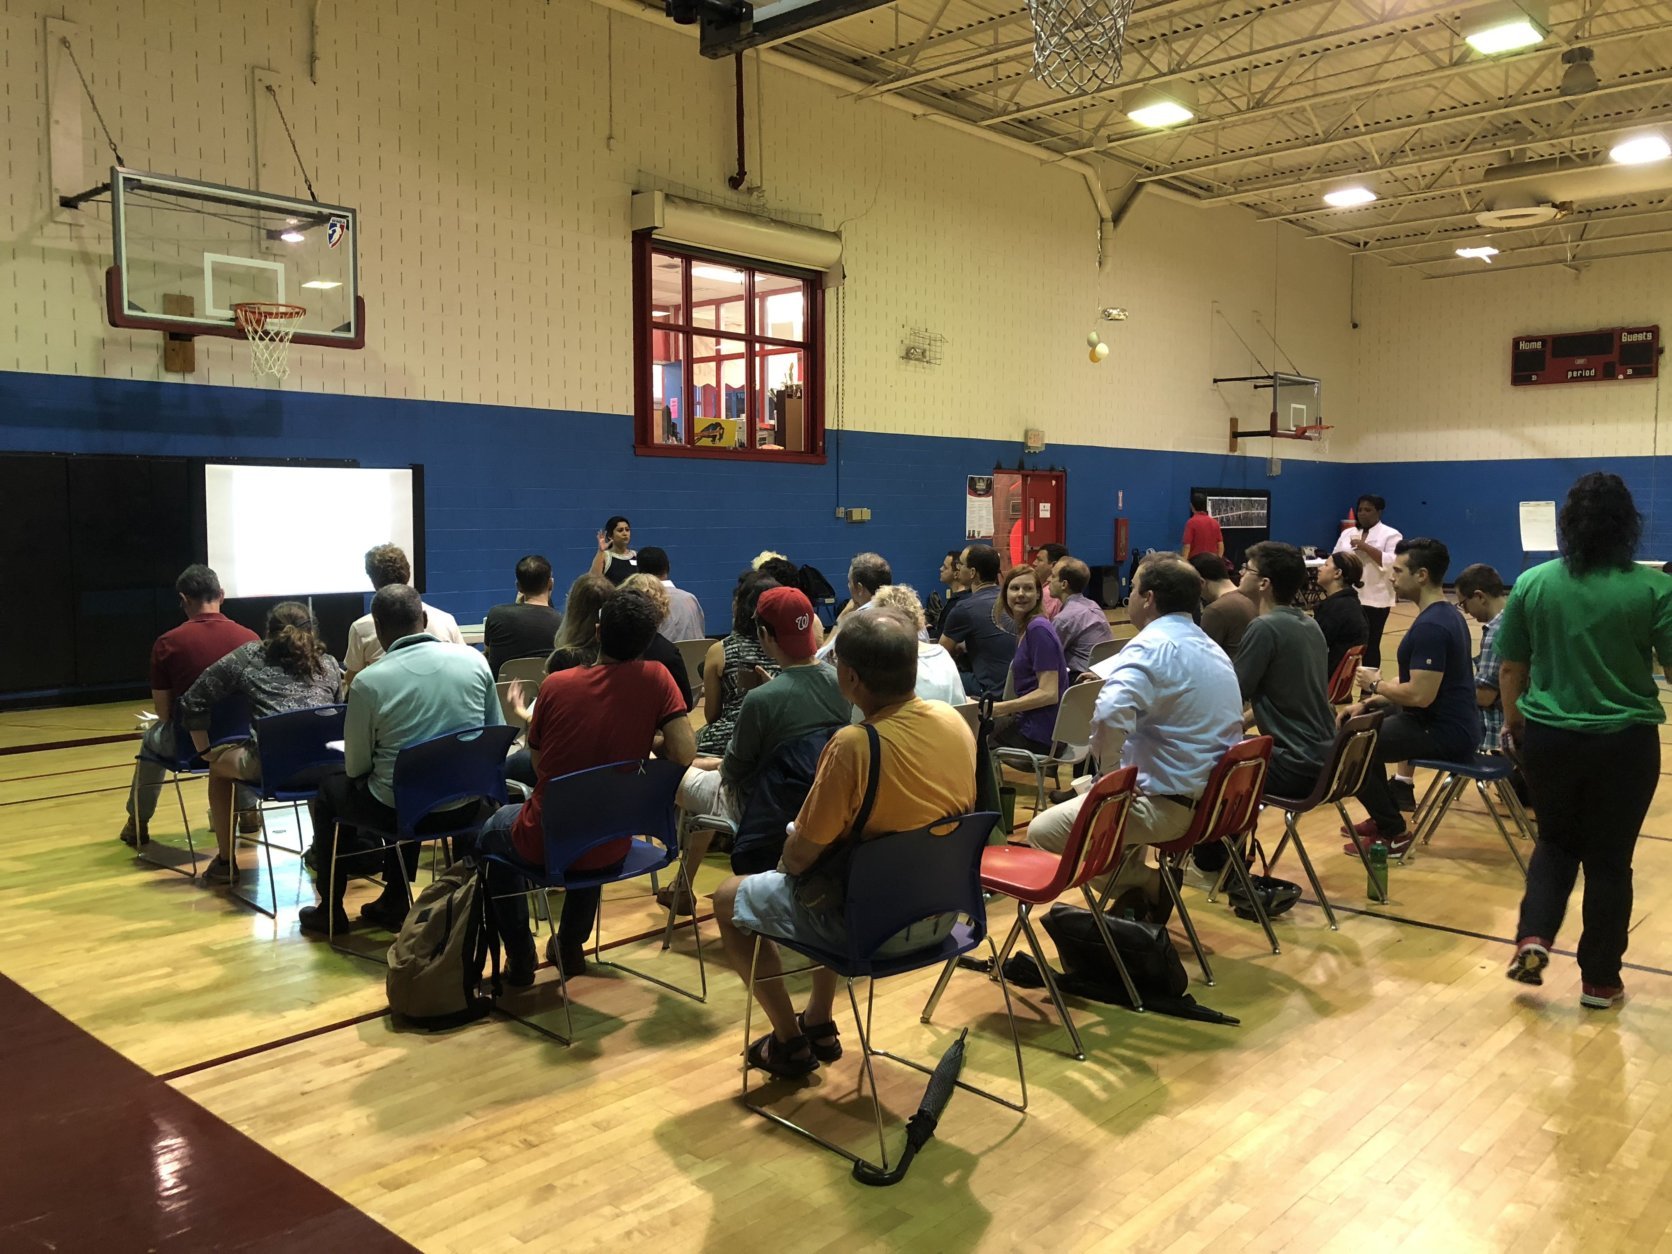 The District Department of Transportation met with community members in the 14th Street corridor Saturday to discuss traffic decongestion and potential bus route improvements. (WTOP/Melissa Howell)